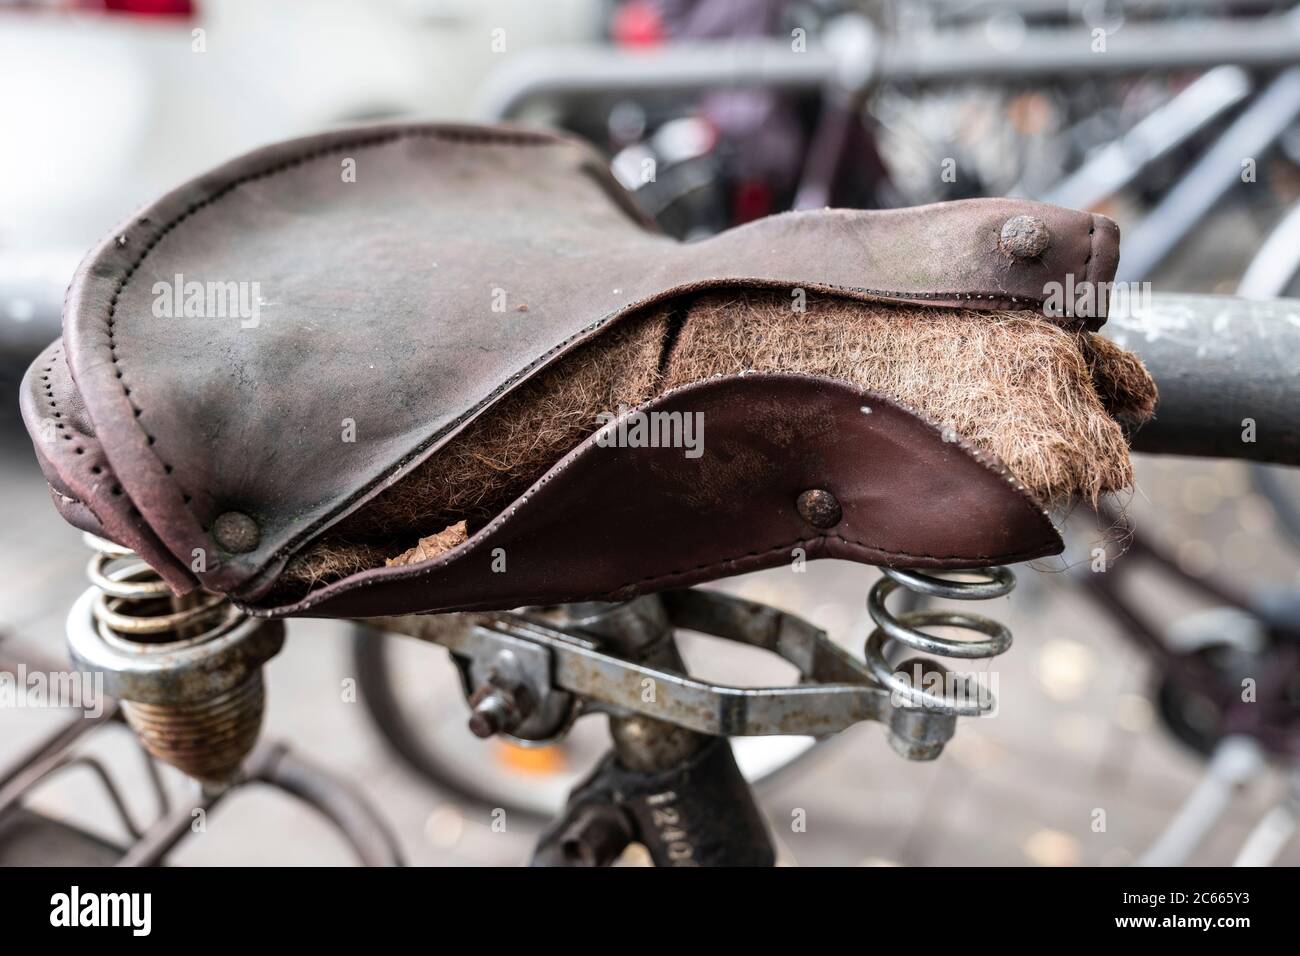 Old bicycle with broken saddle, close-up, detail Stock Photo